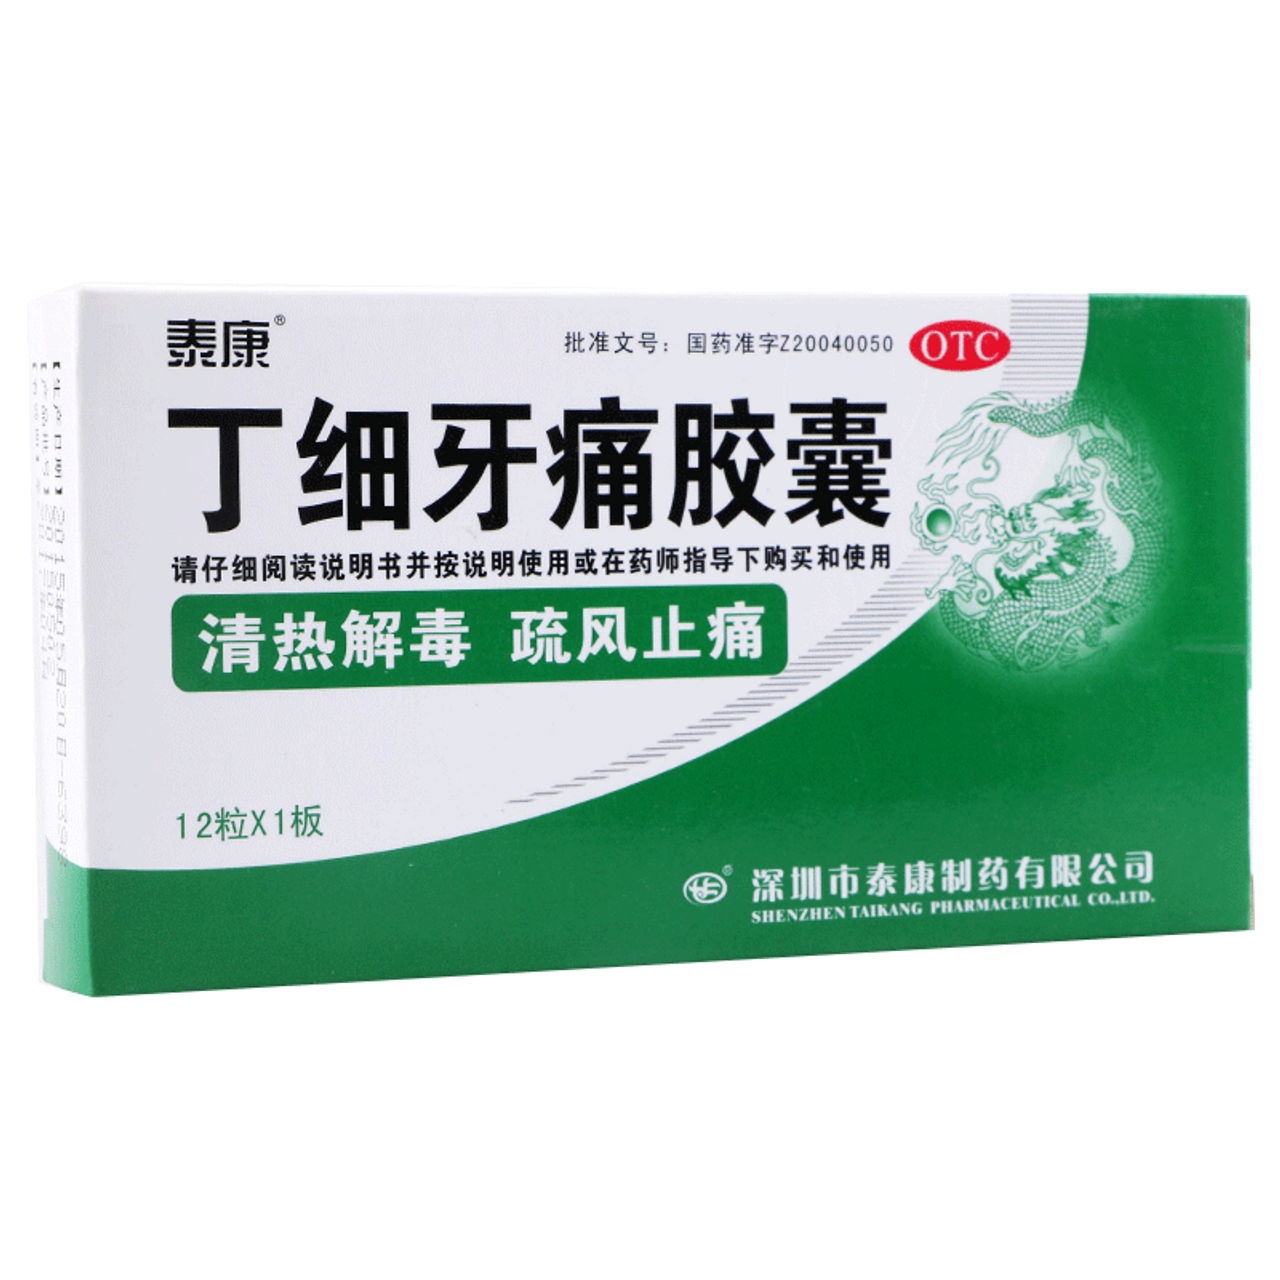 12 Capsules*5 boxes. Traditional Chinese Medicine. Dingxi Yatong Jiaonang or DingXi Toothache Capsules For clearing away heat and toxins, dispelling wind and relieving pain. Used for wind and fire toothache. Ding Xi Ya Tong Jiao Nang